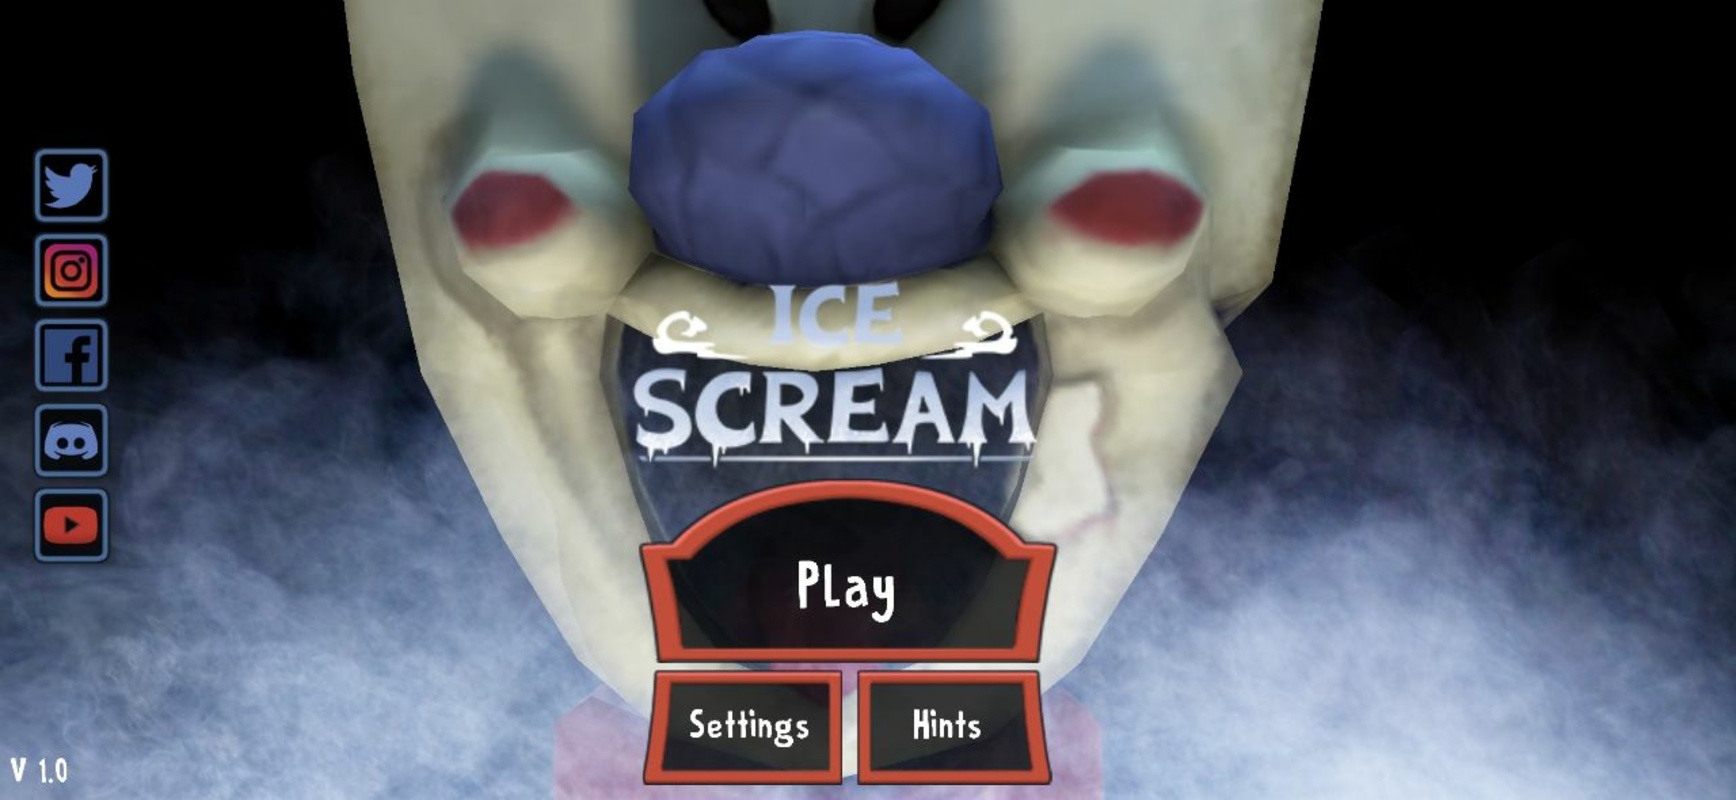 Ice Scream 1.2.3 APK for Android Screenshot 5